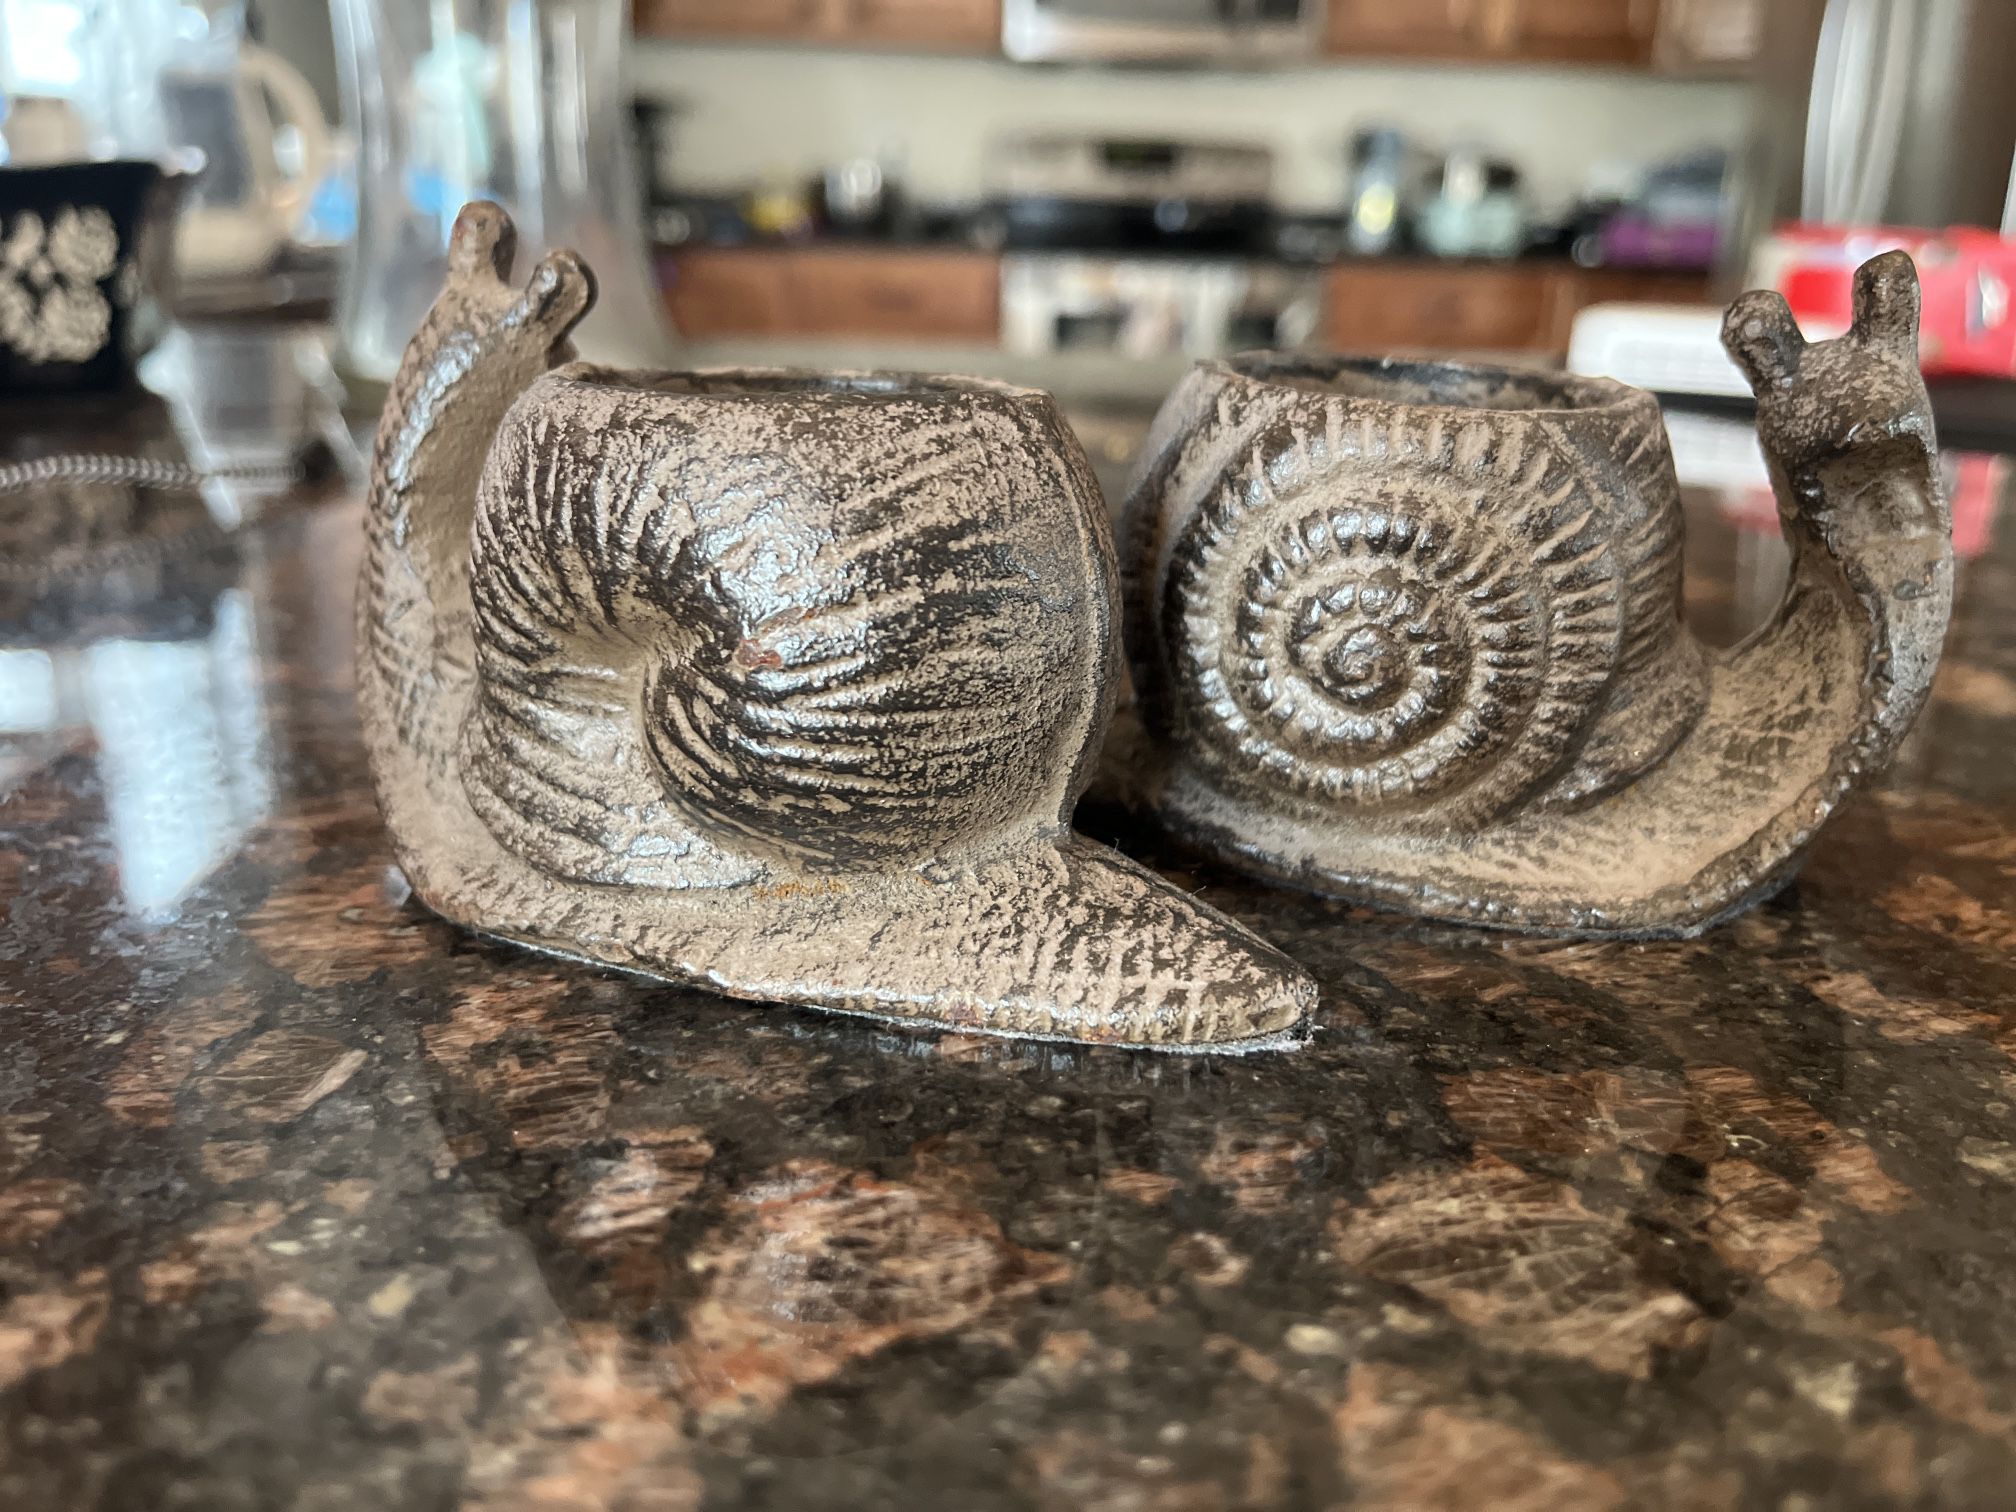 Pair of Metal Snails Candle Holders 2 1/2" Tall x 3 1/2"